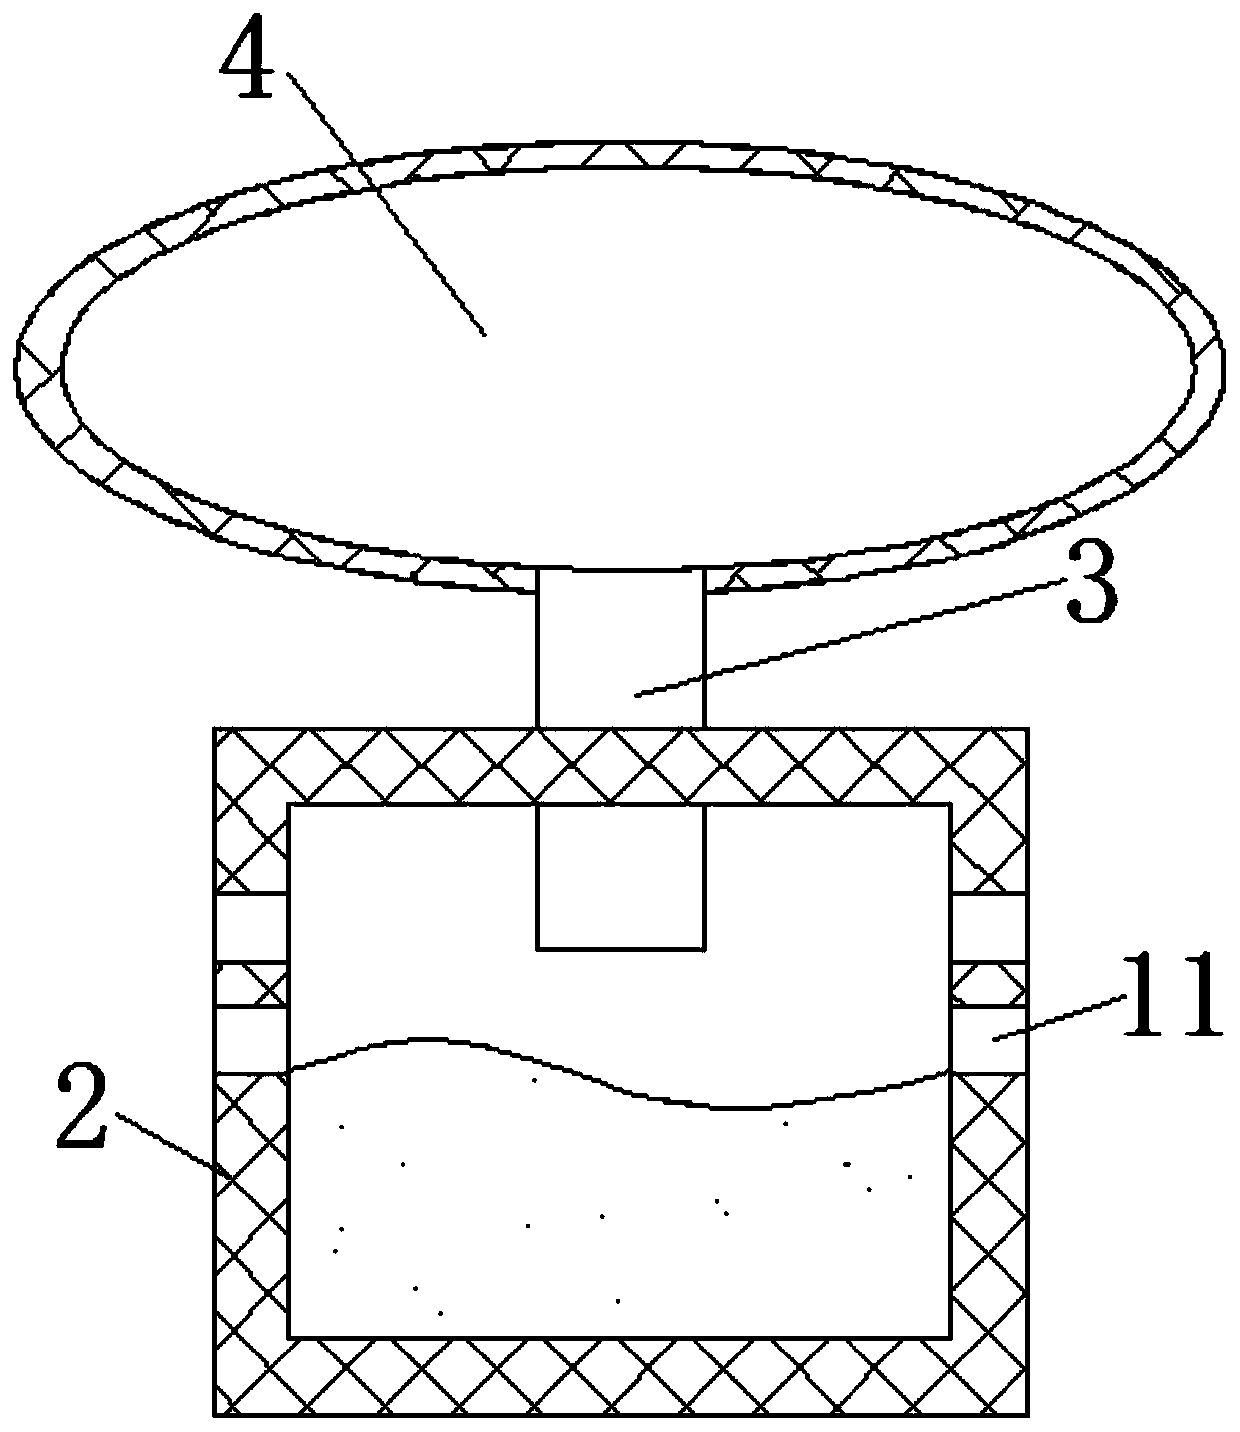 Device for increasing oxygen content of sewage based on object mass